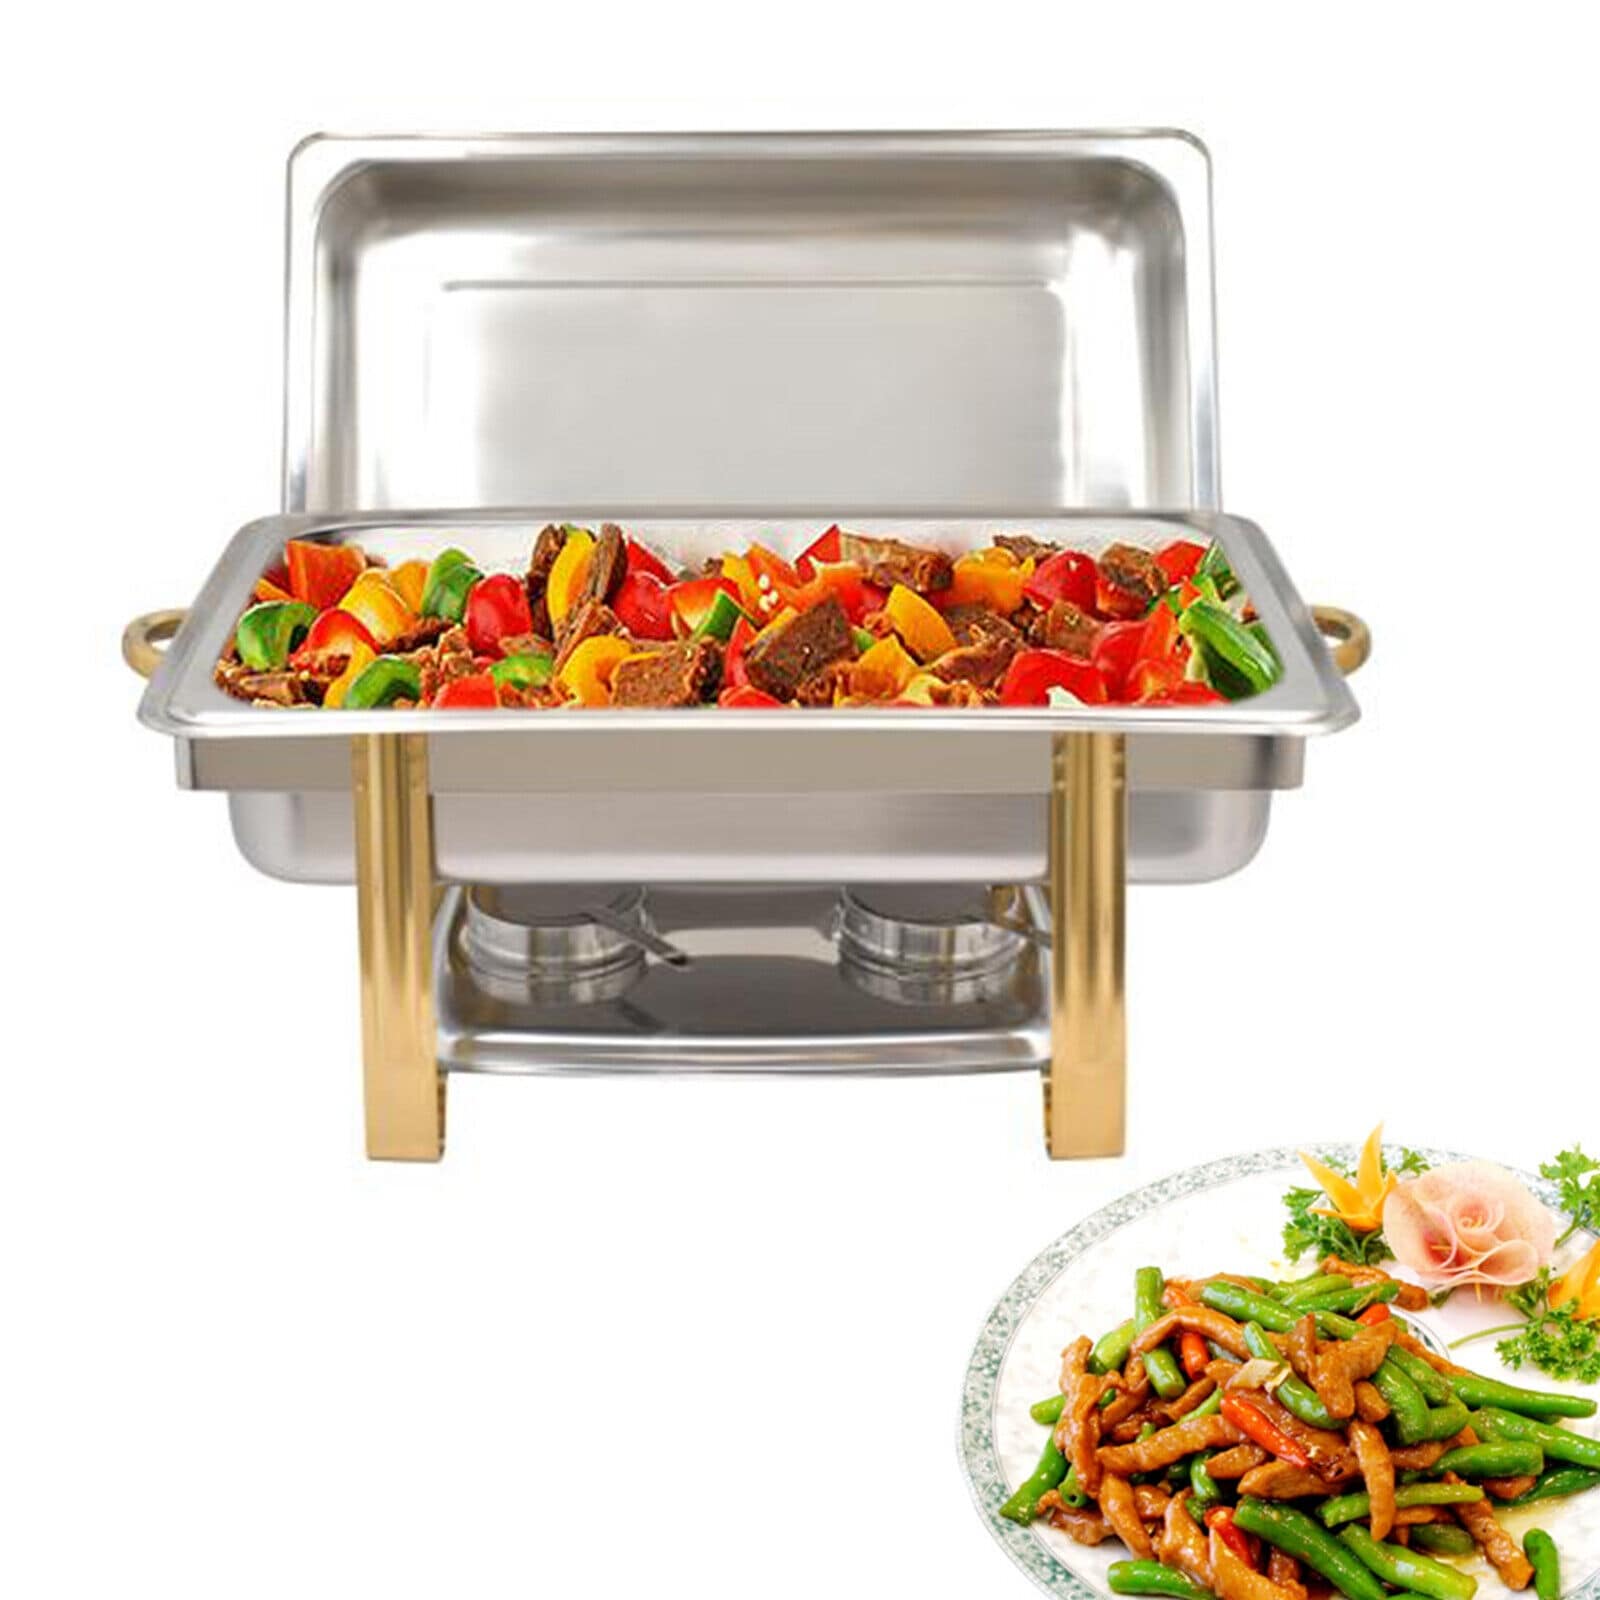 Latest Style Hot Food Warmer Buffet Server Equipment Rectangular Roll Top  9L Gold Stainless Steel Chafing Dishes For Party